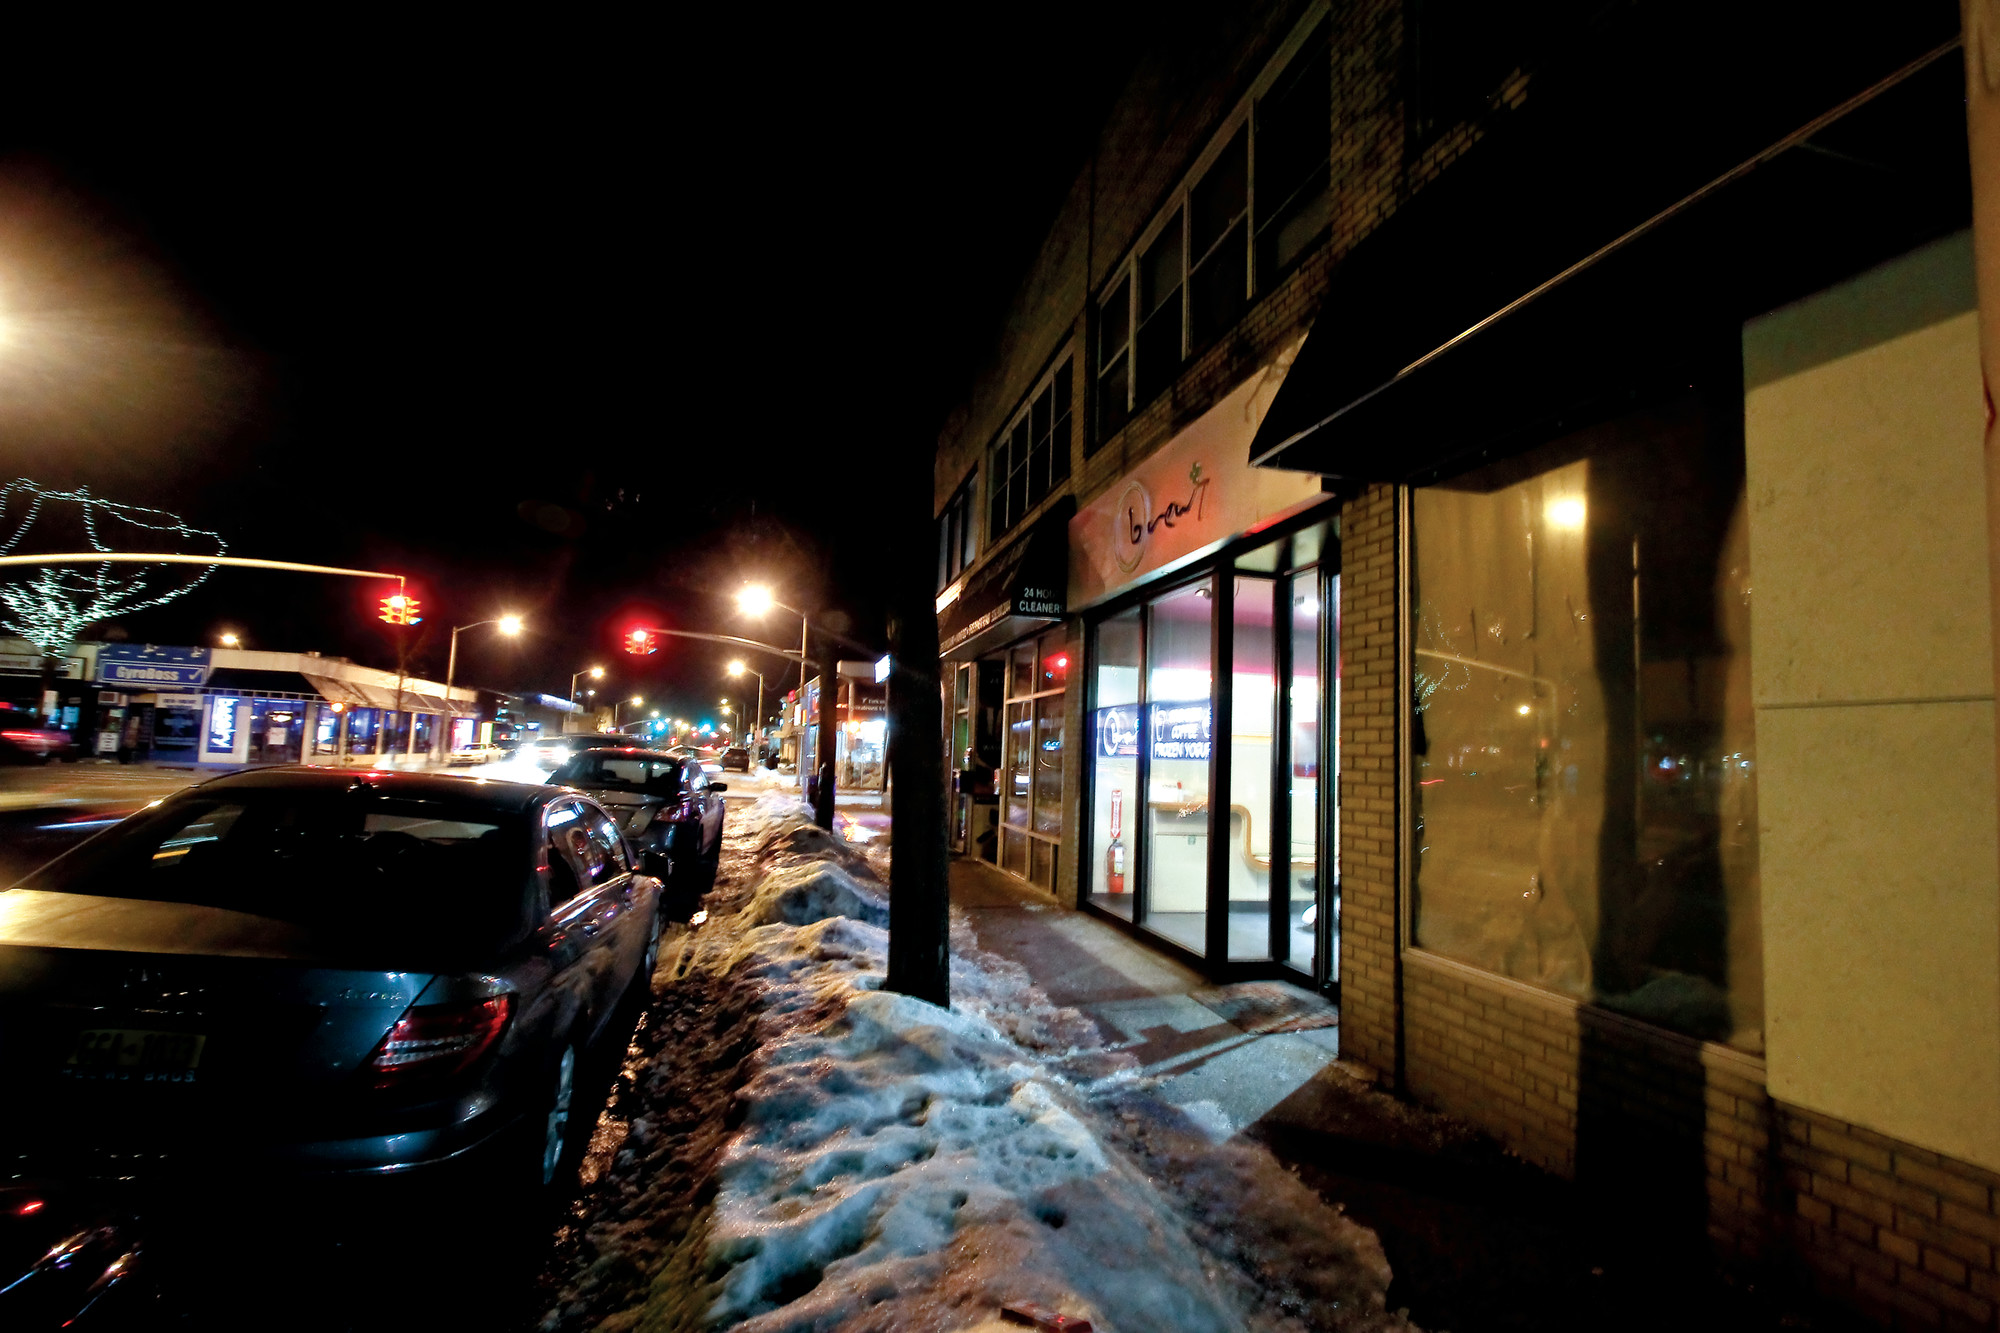 Merrick Road businesses have said their block is too dark at night, which deters shoppers.